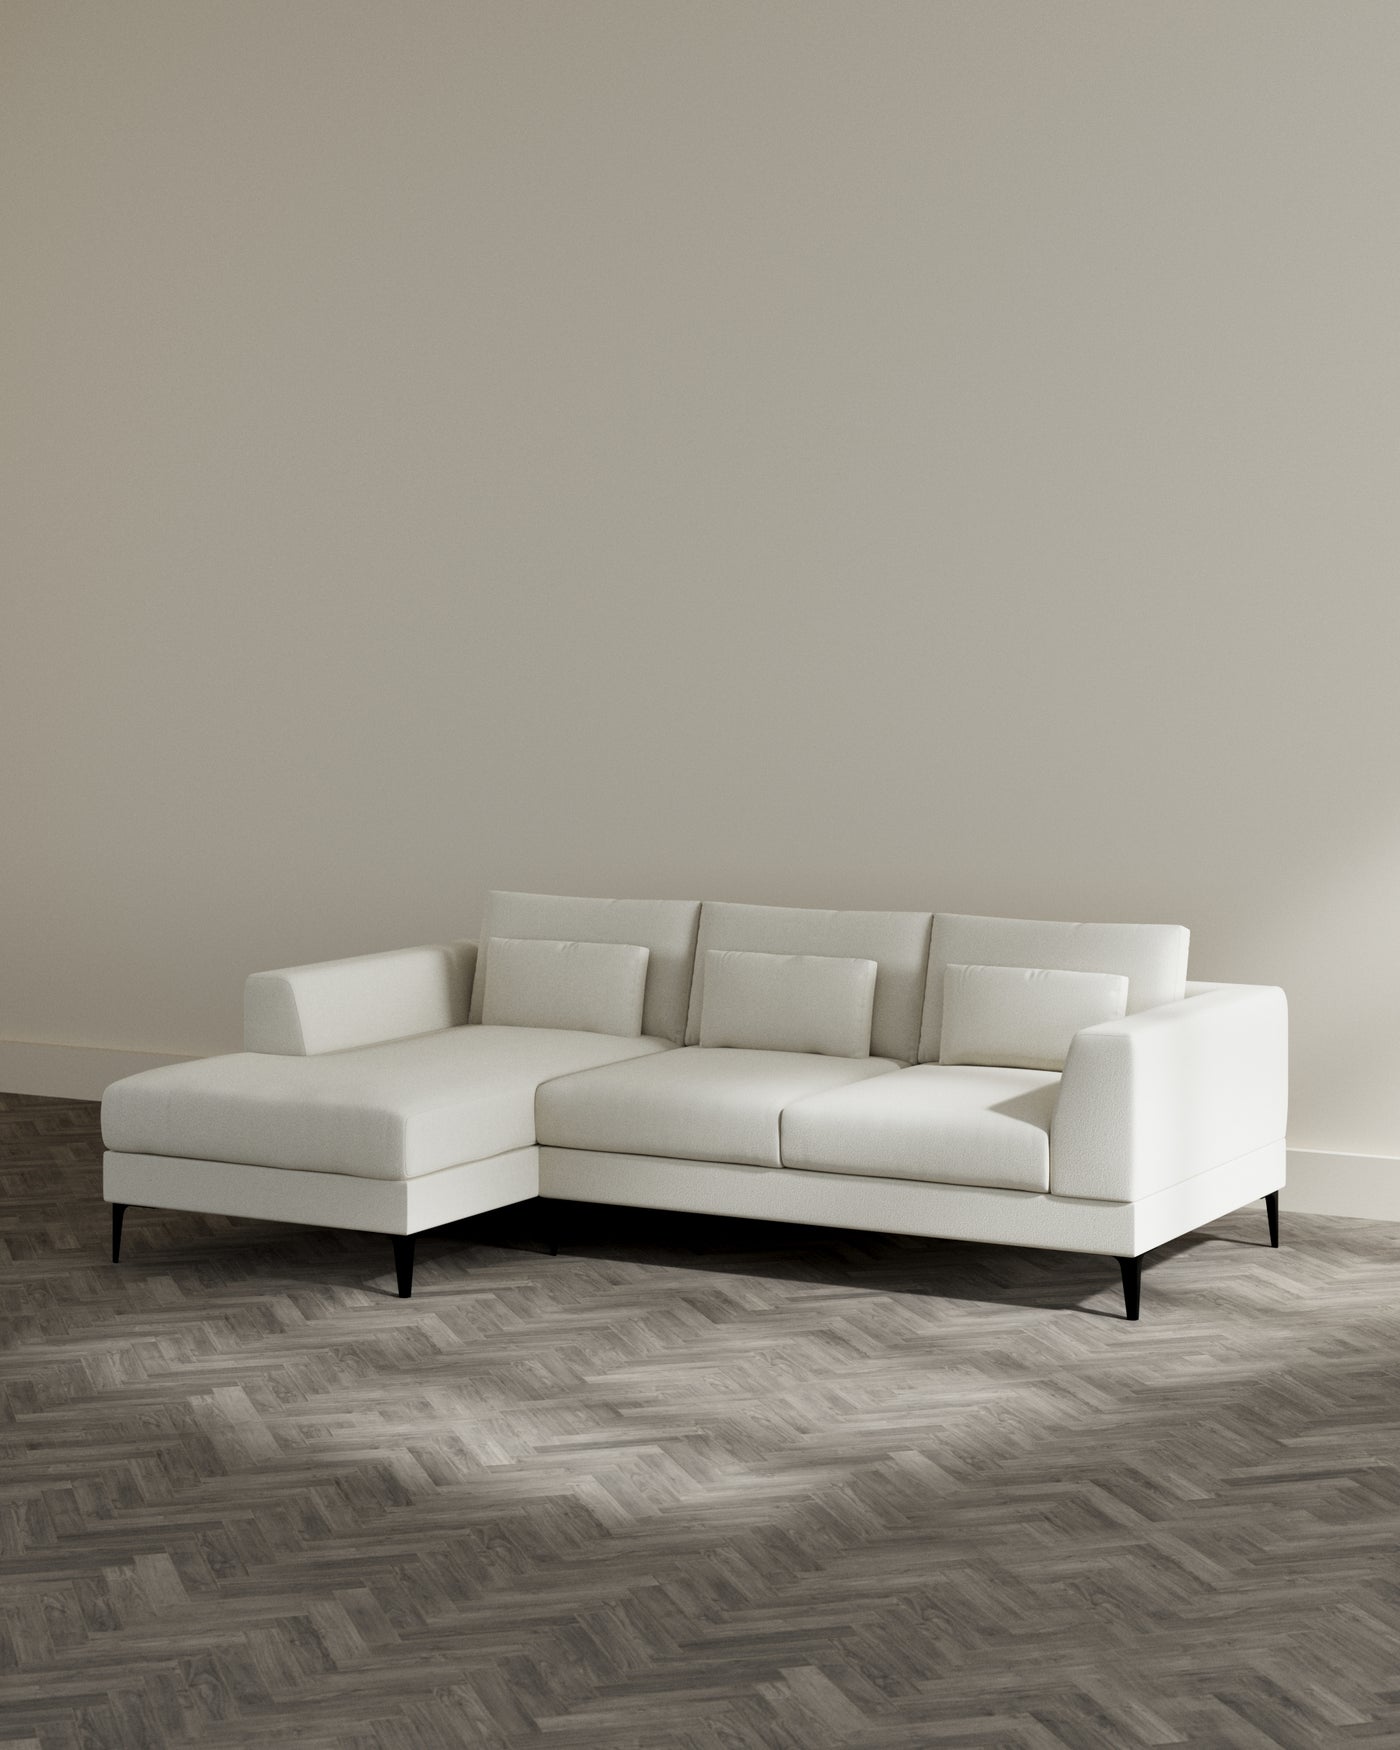 Modern light beige corner sectional sofa with clean lines, plush cushions, and tapered dark wooden legs on a herringbone patterned wooden floor.